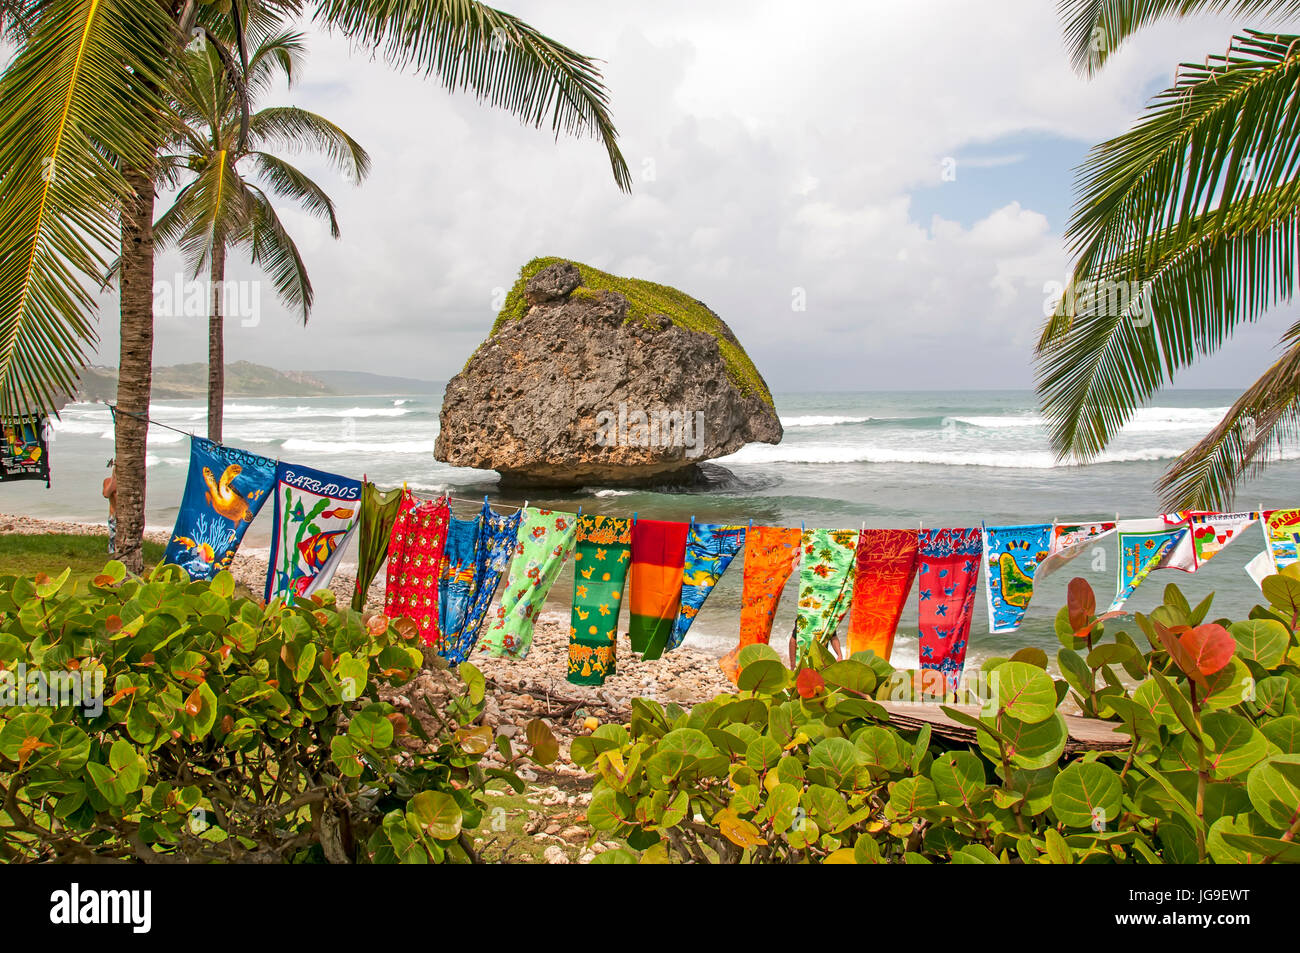 Bathsheba Barbados dramatic boulder on deserted beach with colorful clothes on clothesline blowing in wind. Stock Photo